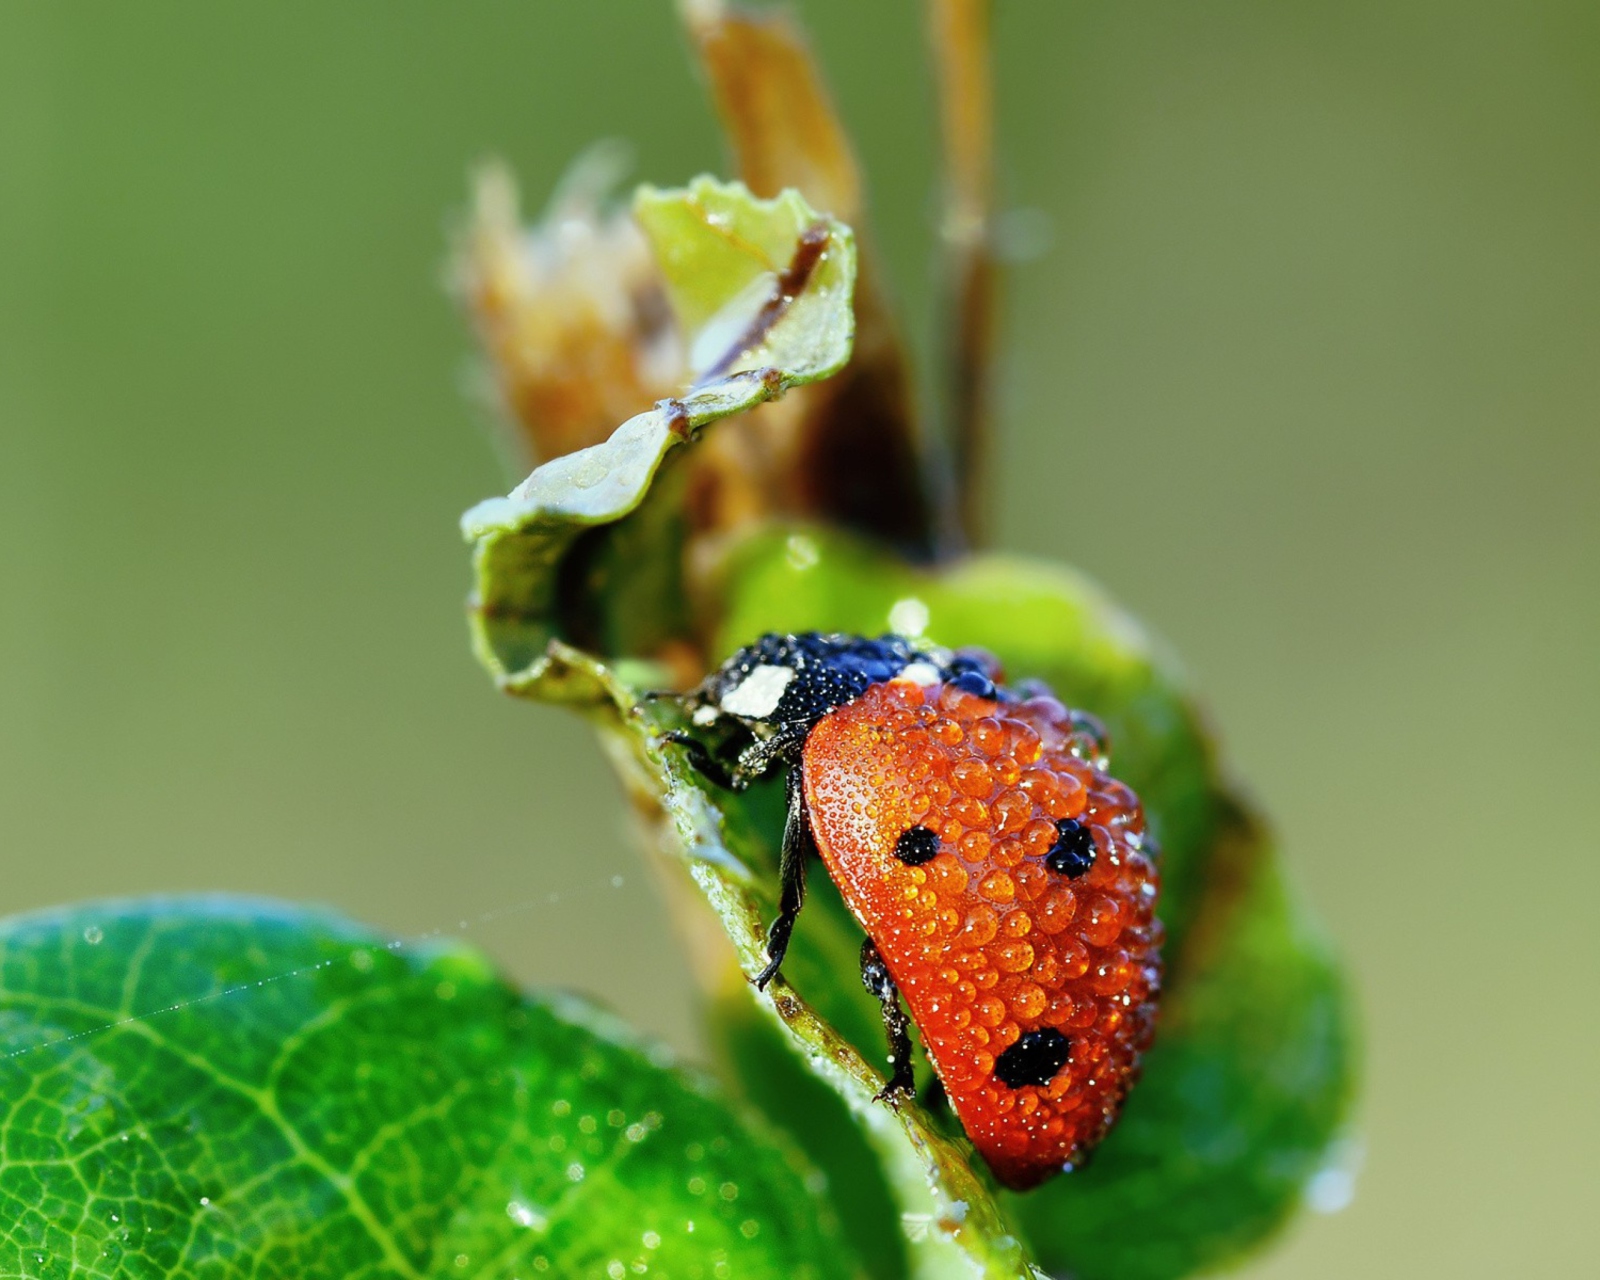 Das Ladybug Covered With Dew Drops Wallpaper 1600x1280